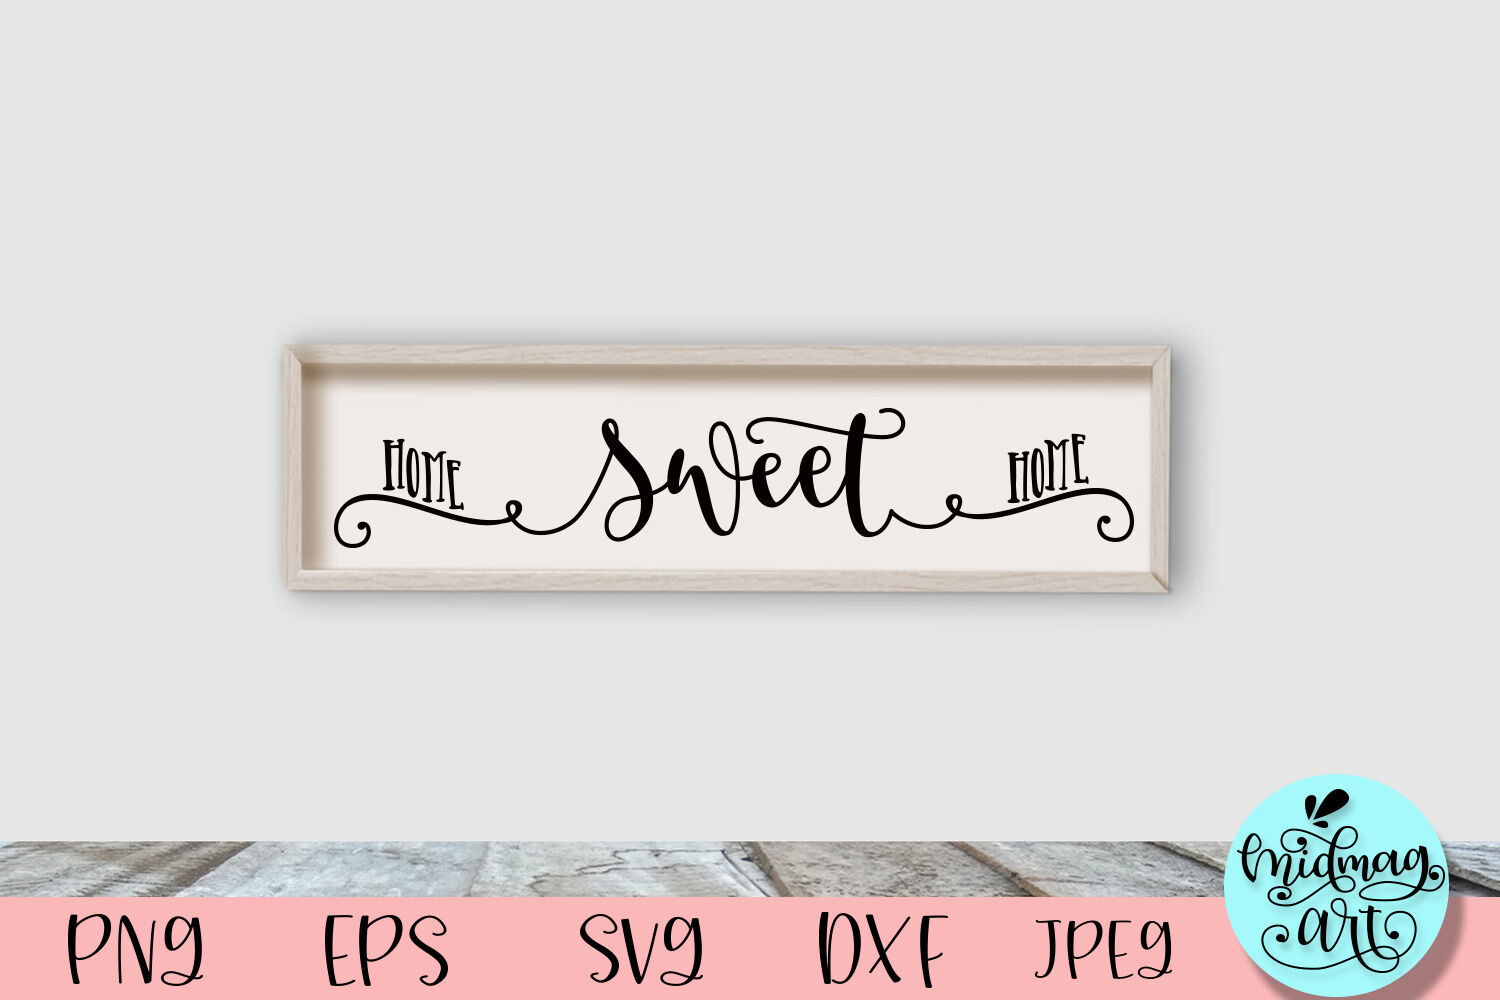 Home sweet home wood sign svg By Midmagart | TheHungryJPEG.com